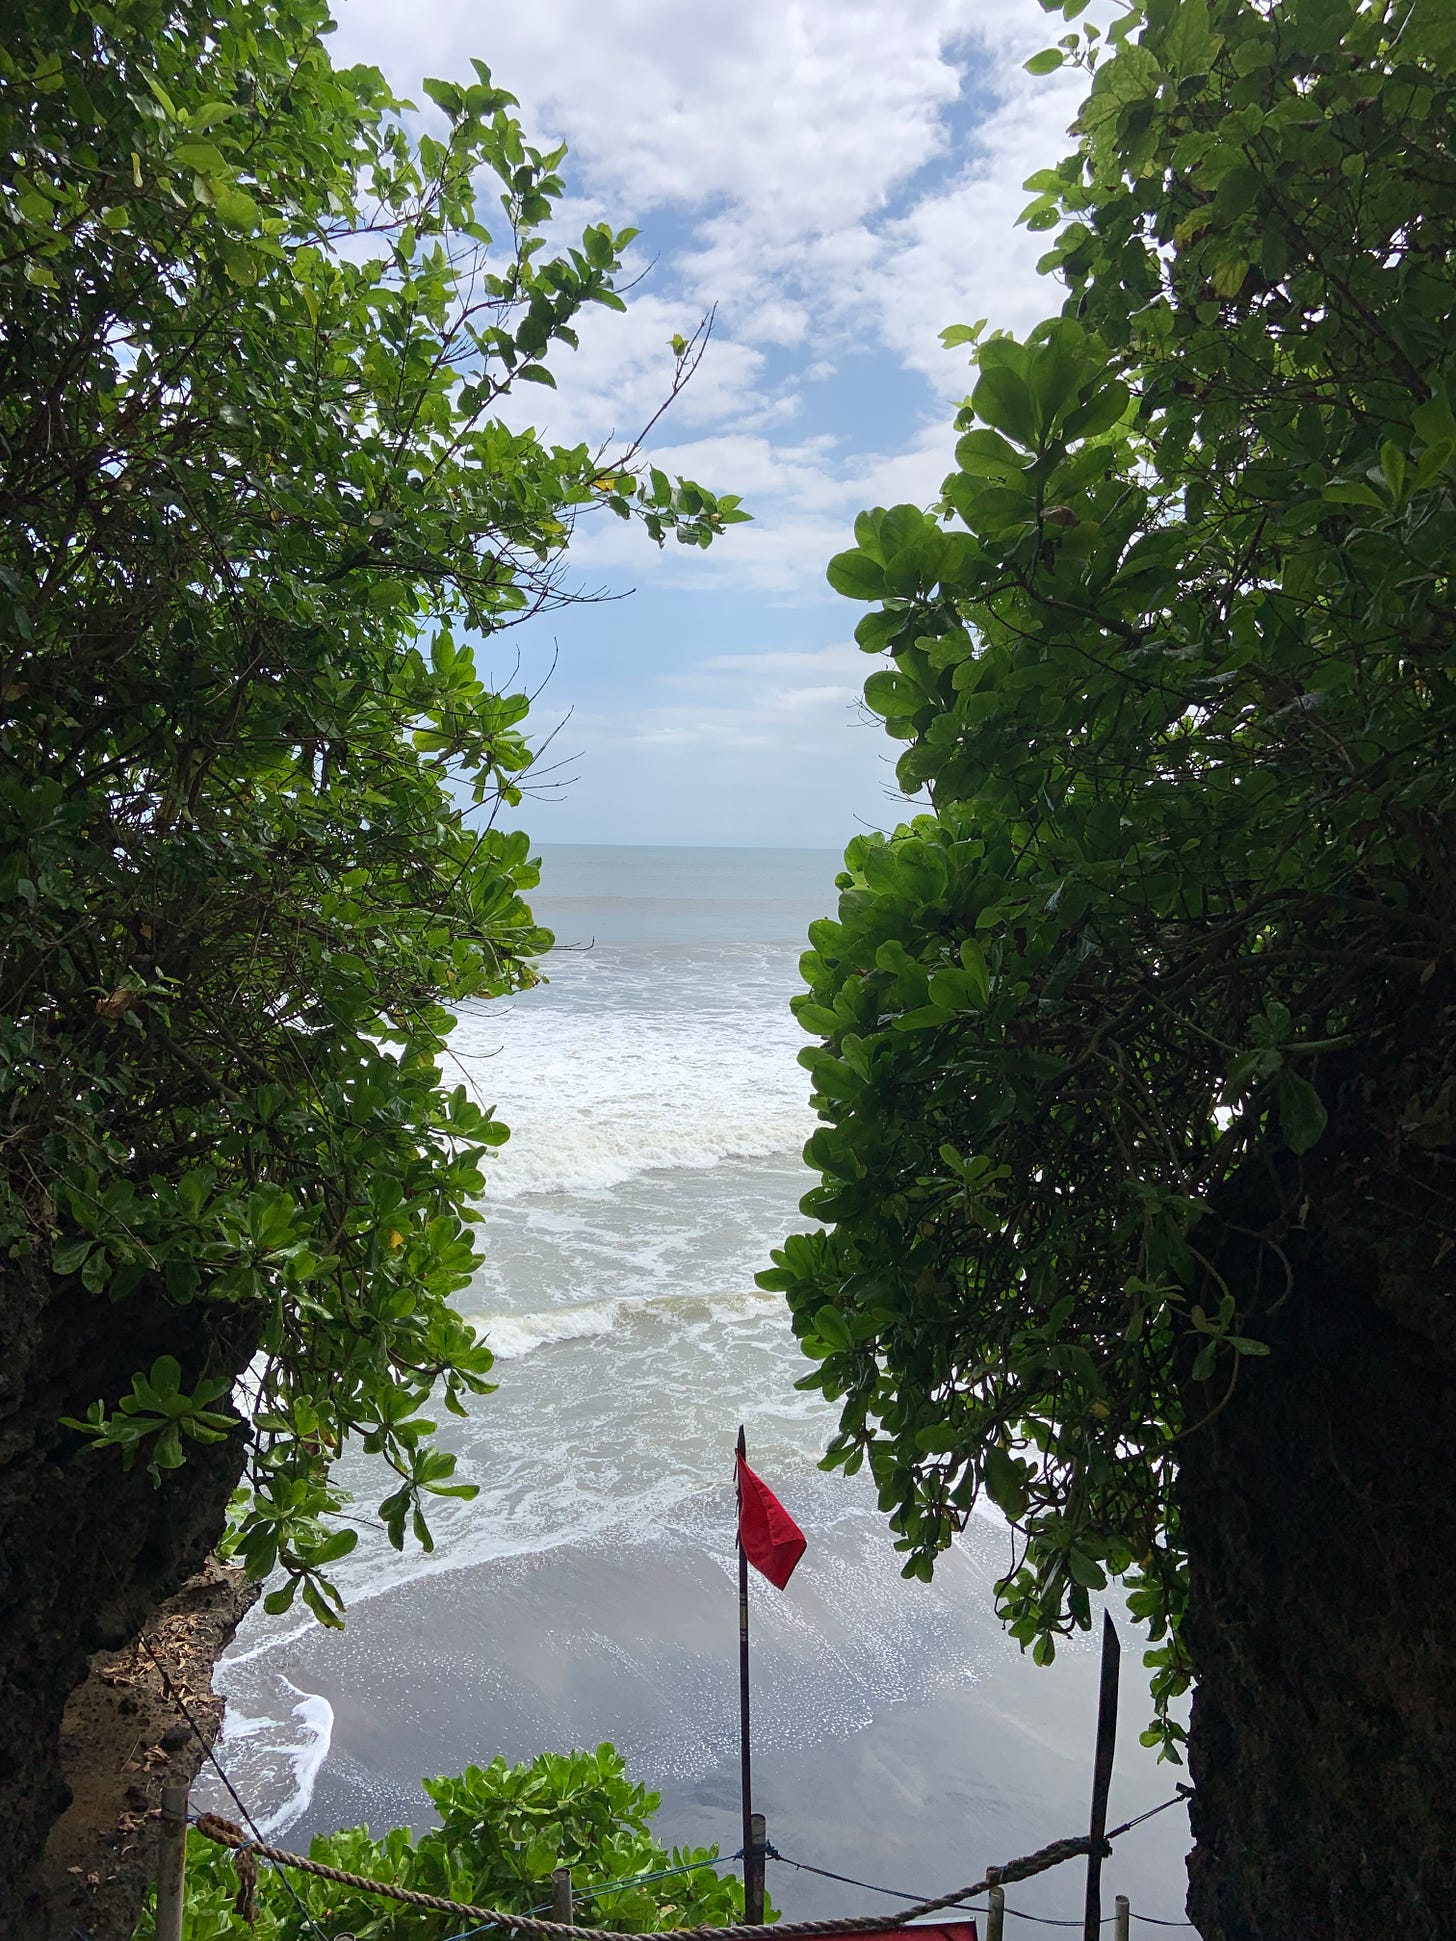 a photo of the beach captured in between two green trees; a red flag is posted in the middle signaling a high tide